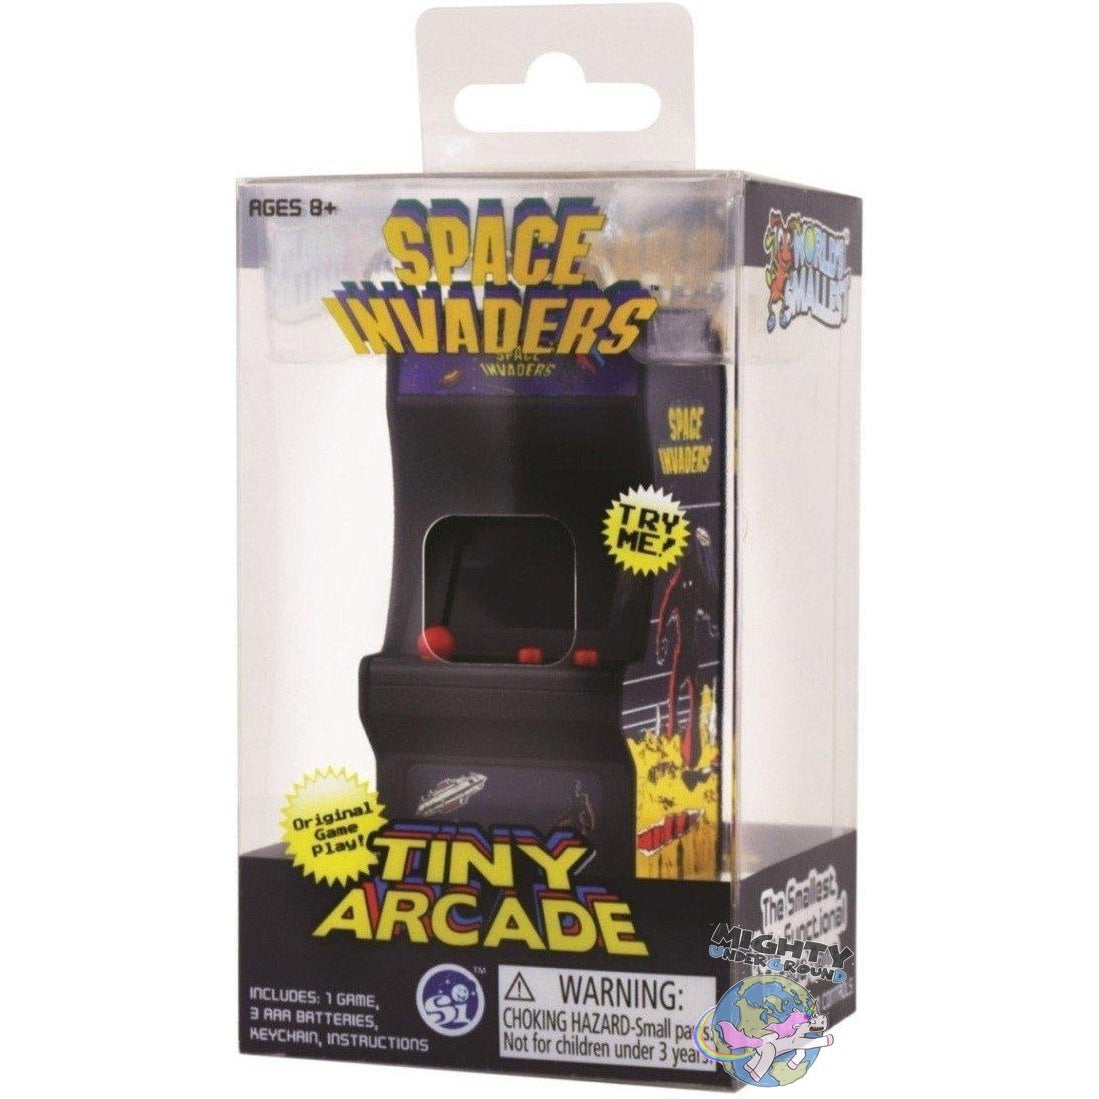 Tiny Arcade: Space Invaders-Games-Super Impulse / World's Smallest Toys-mighty-underground